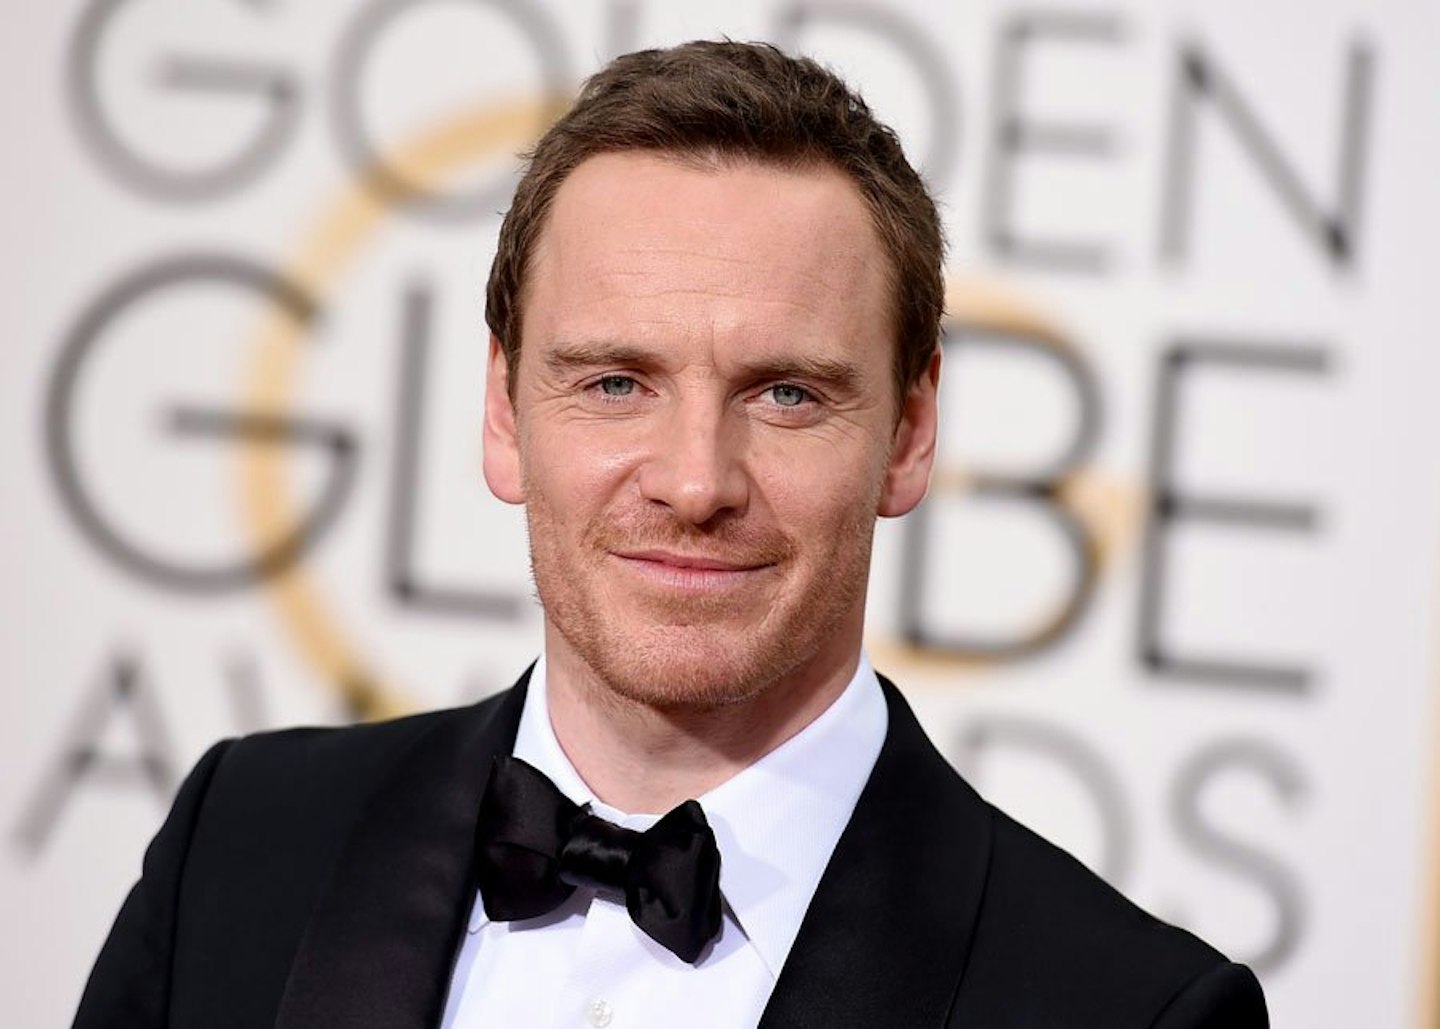 Michael Fassbender, actor (12 Years a Slave)